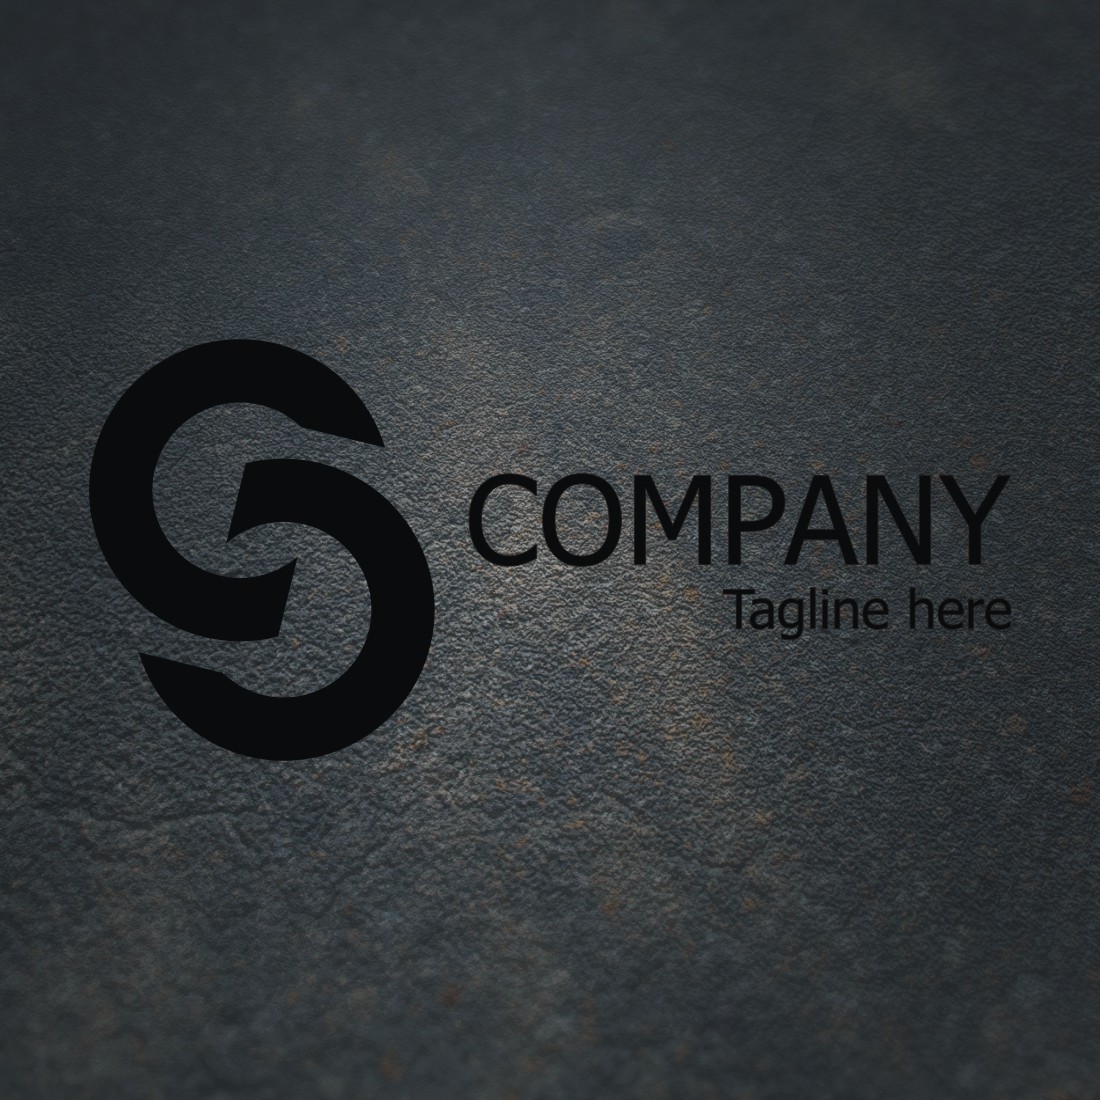 S professional logo cover image.